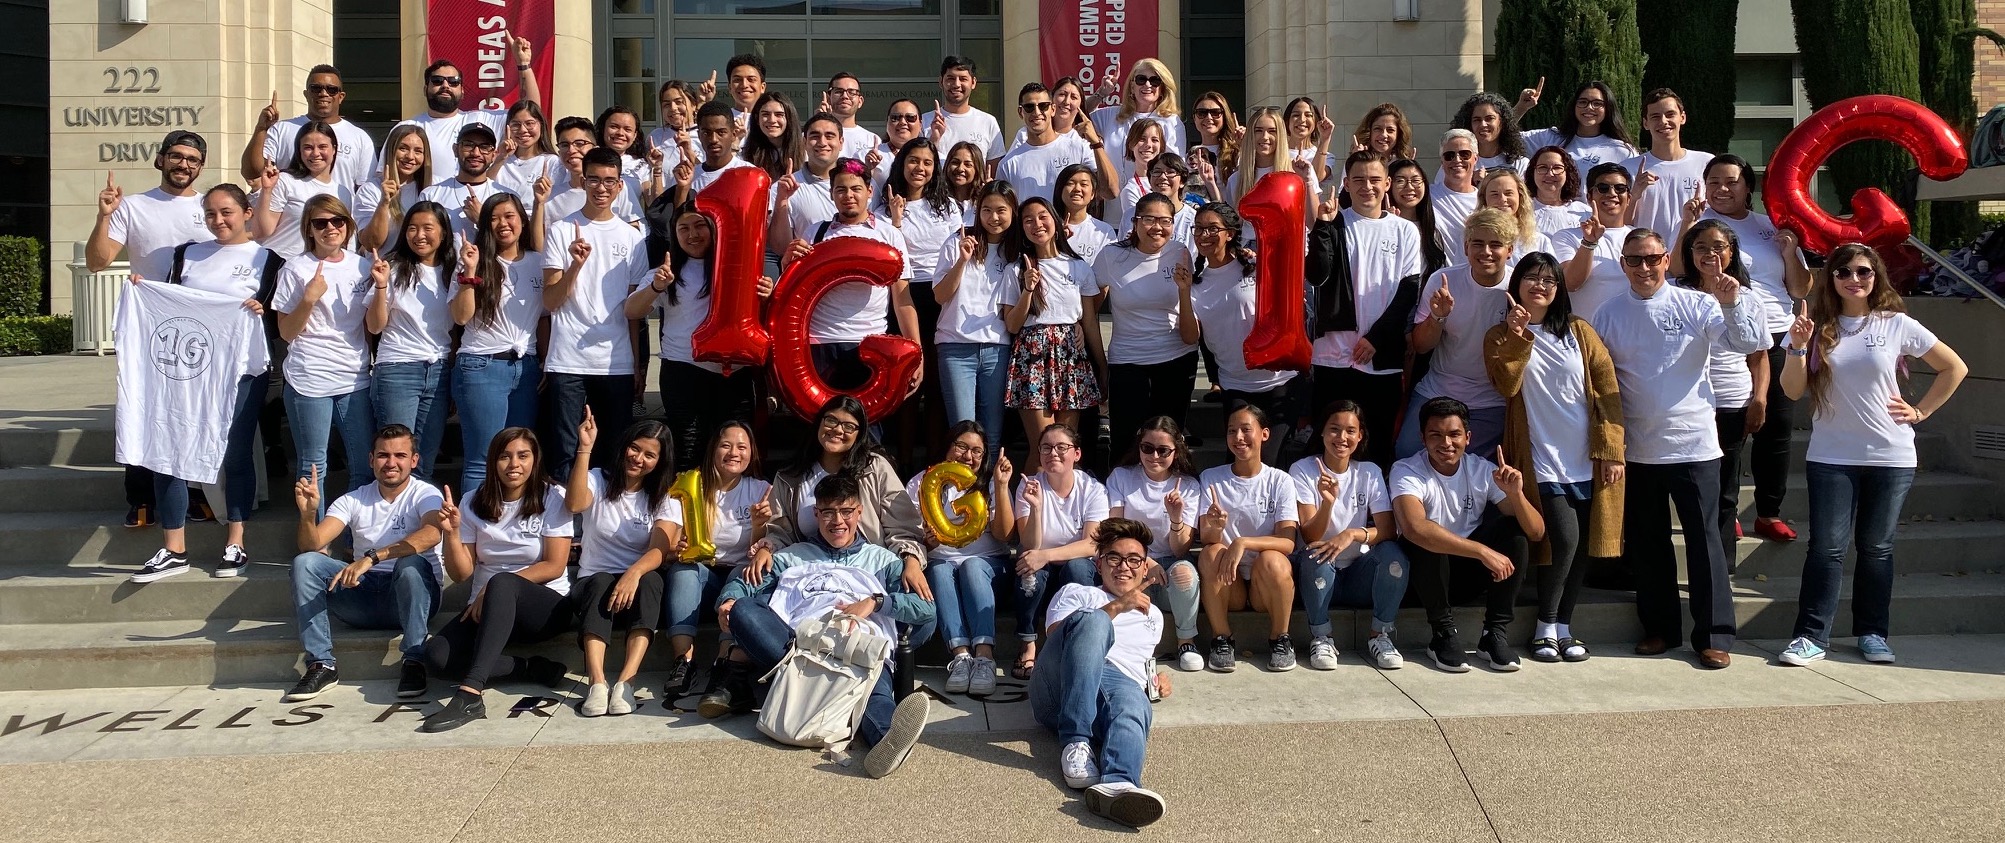 first-gen community members of Chapman University pose for photo holding "1G" balloons